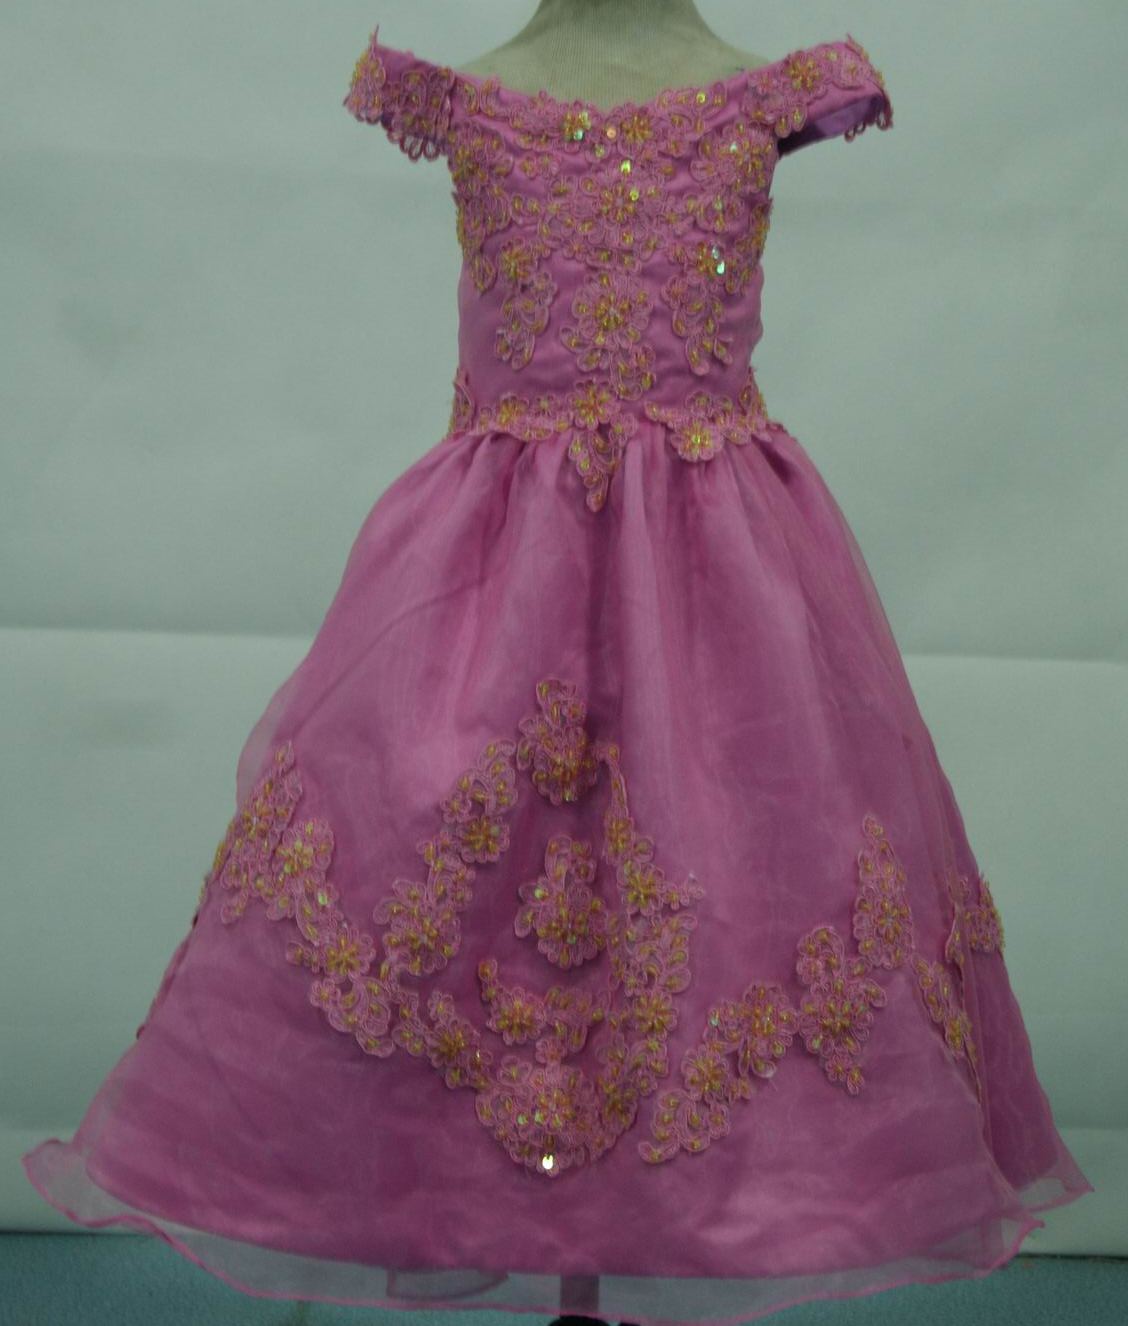 pink pageant dress